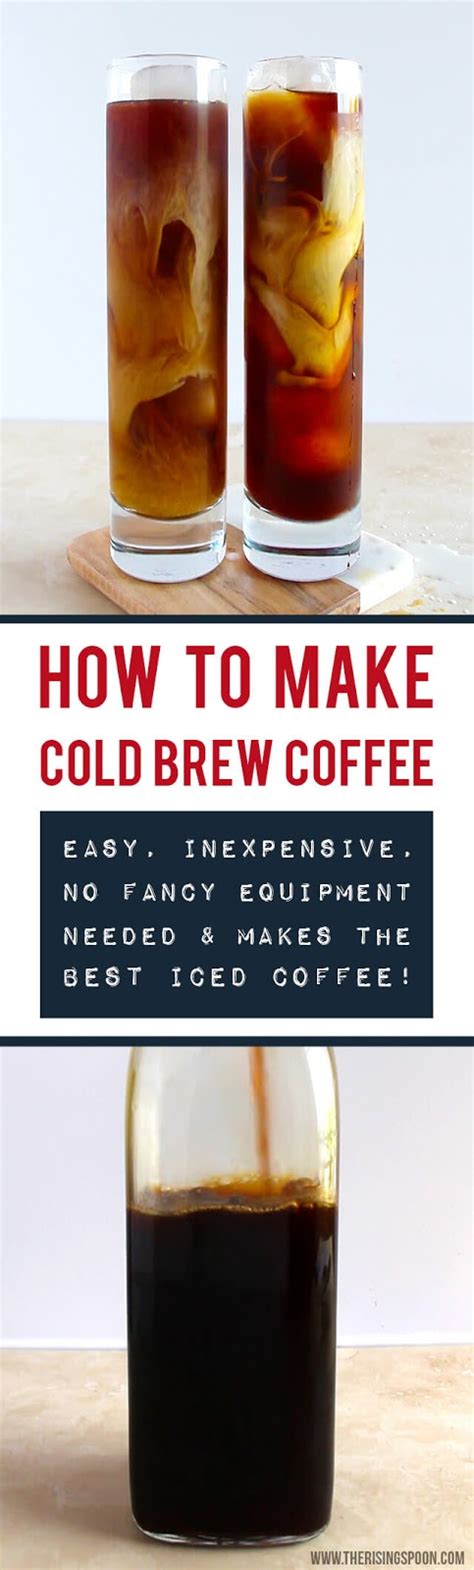 How To Make Cold Brew Coffee The Best Method For Iced Coffee The